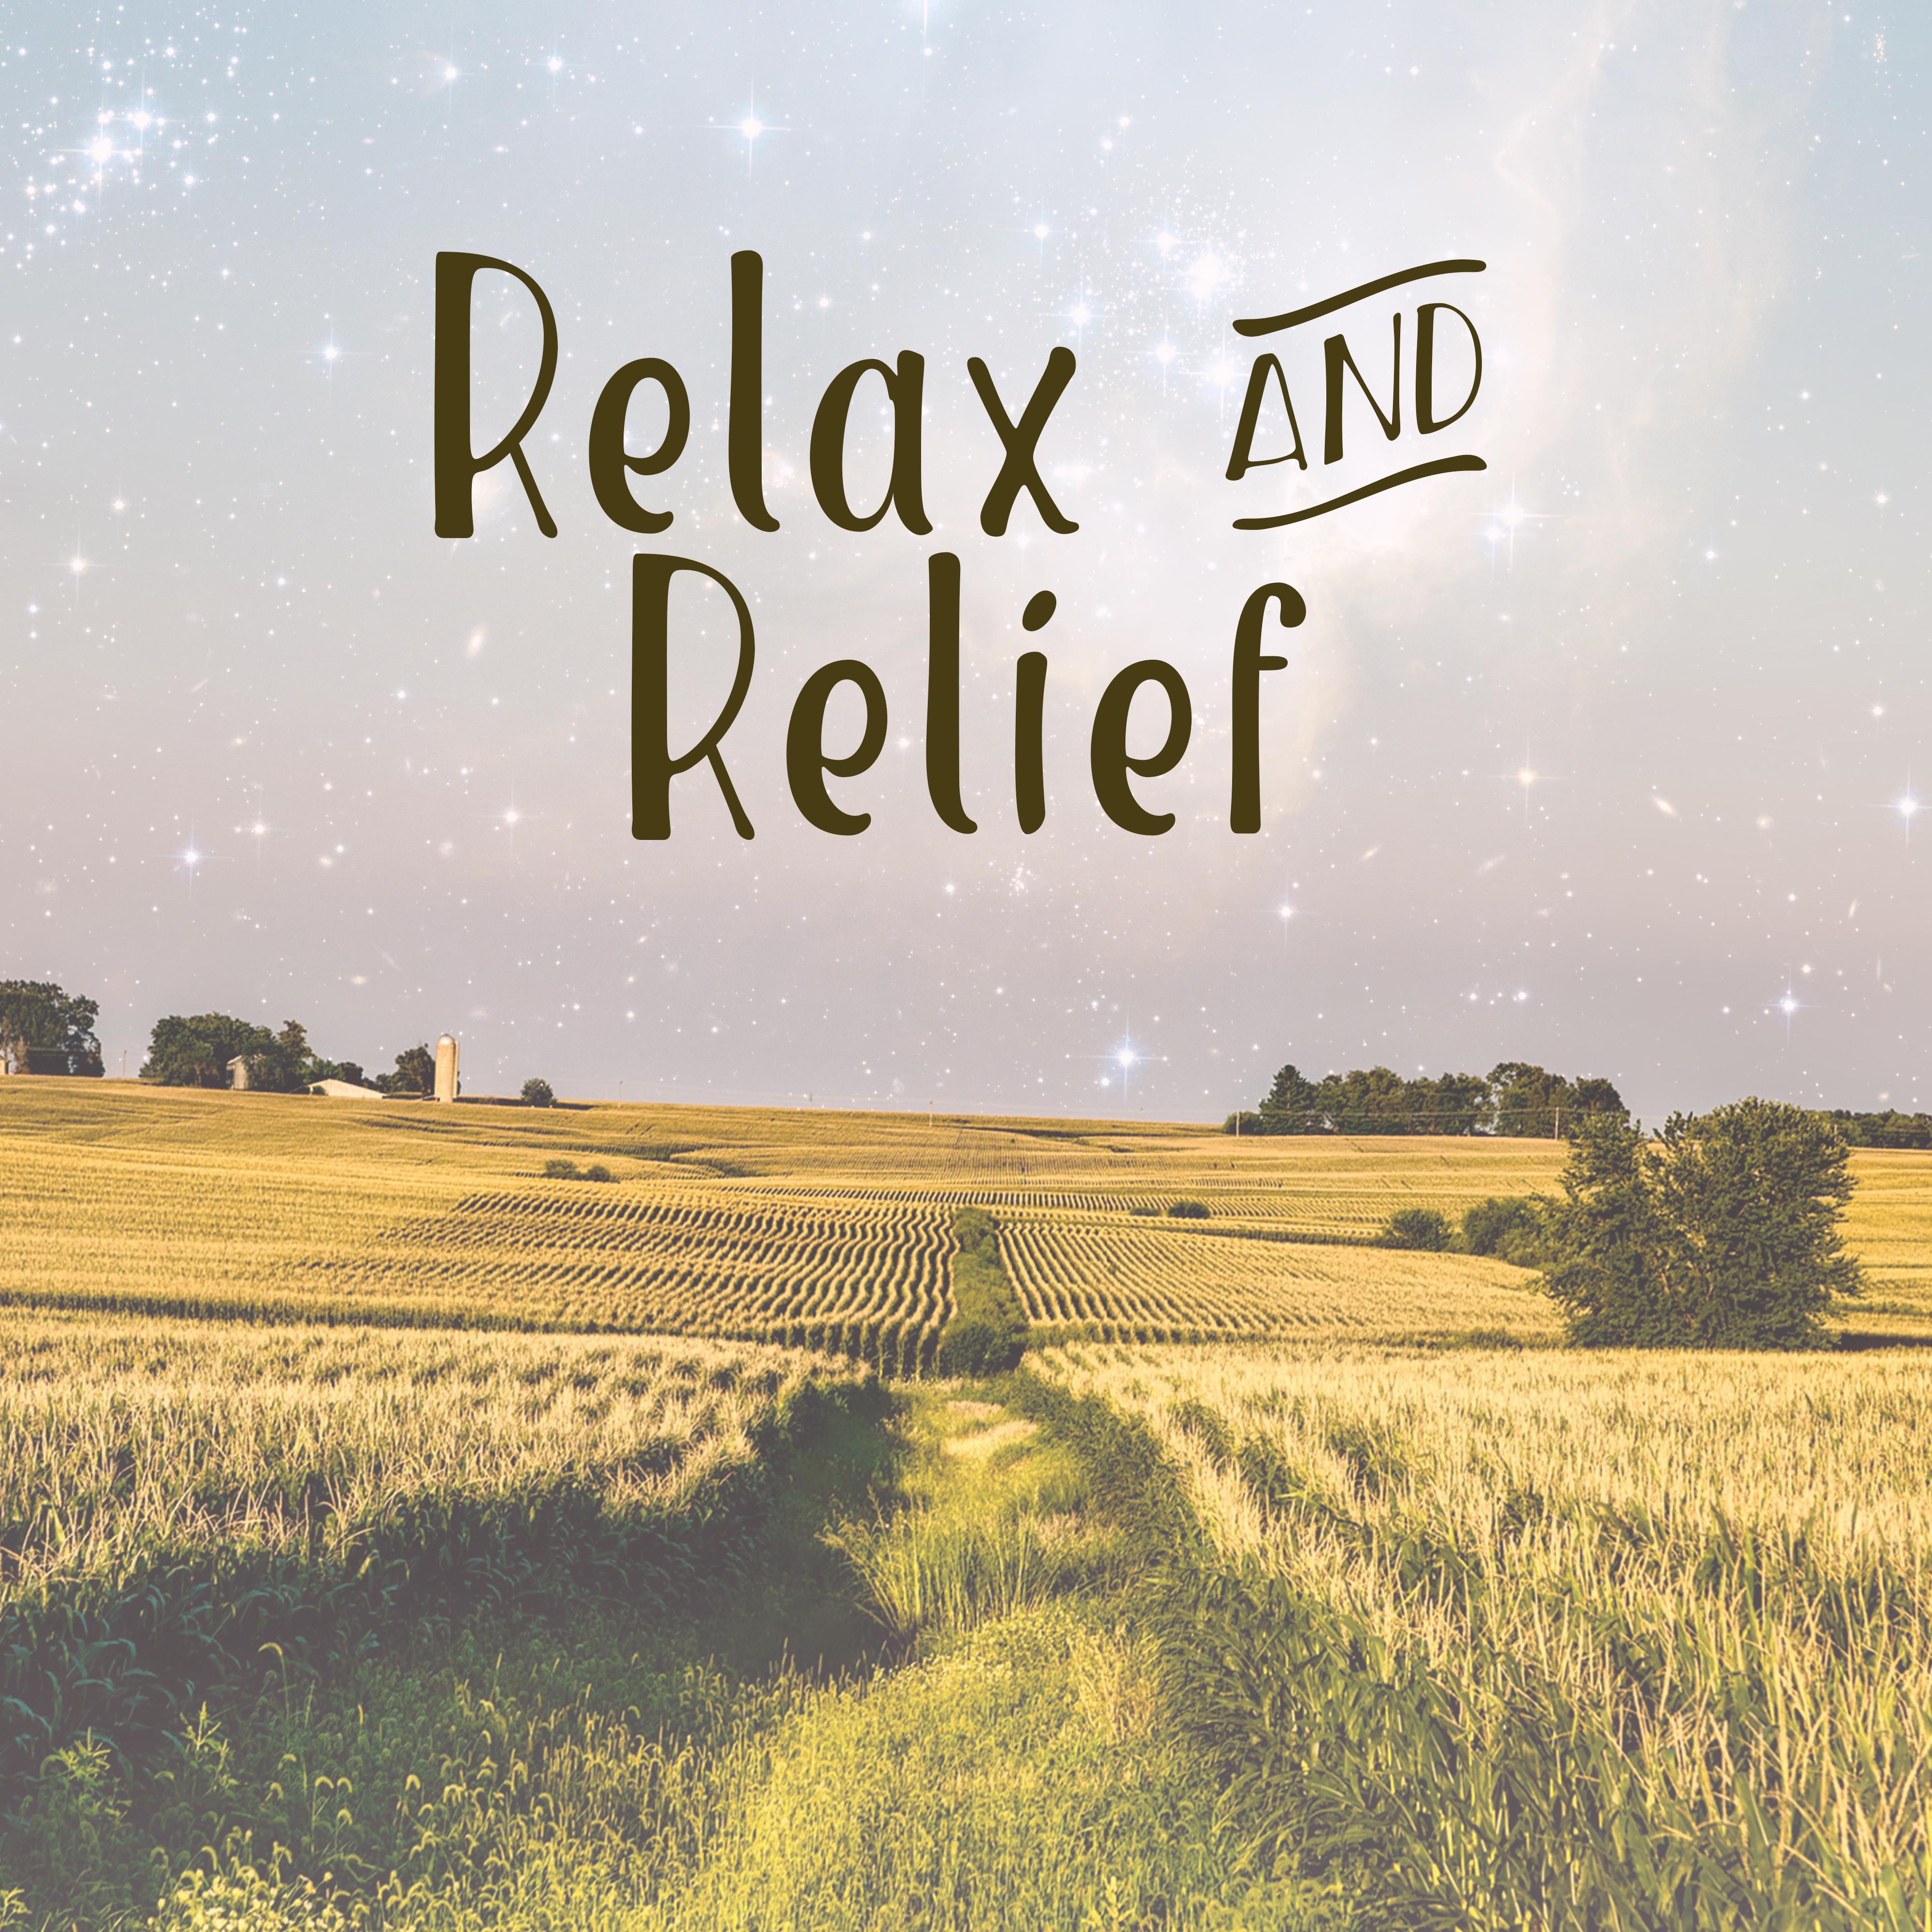 Relax & Relief – Soft Nature Sounds to Calm Down, Pure Relaxation, Soothing Rain, Singing Birds, Wind, Peaceful Mind, Rest